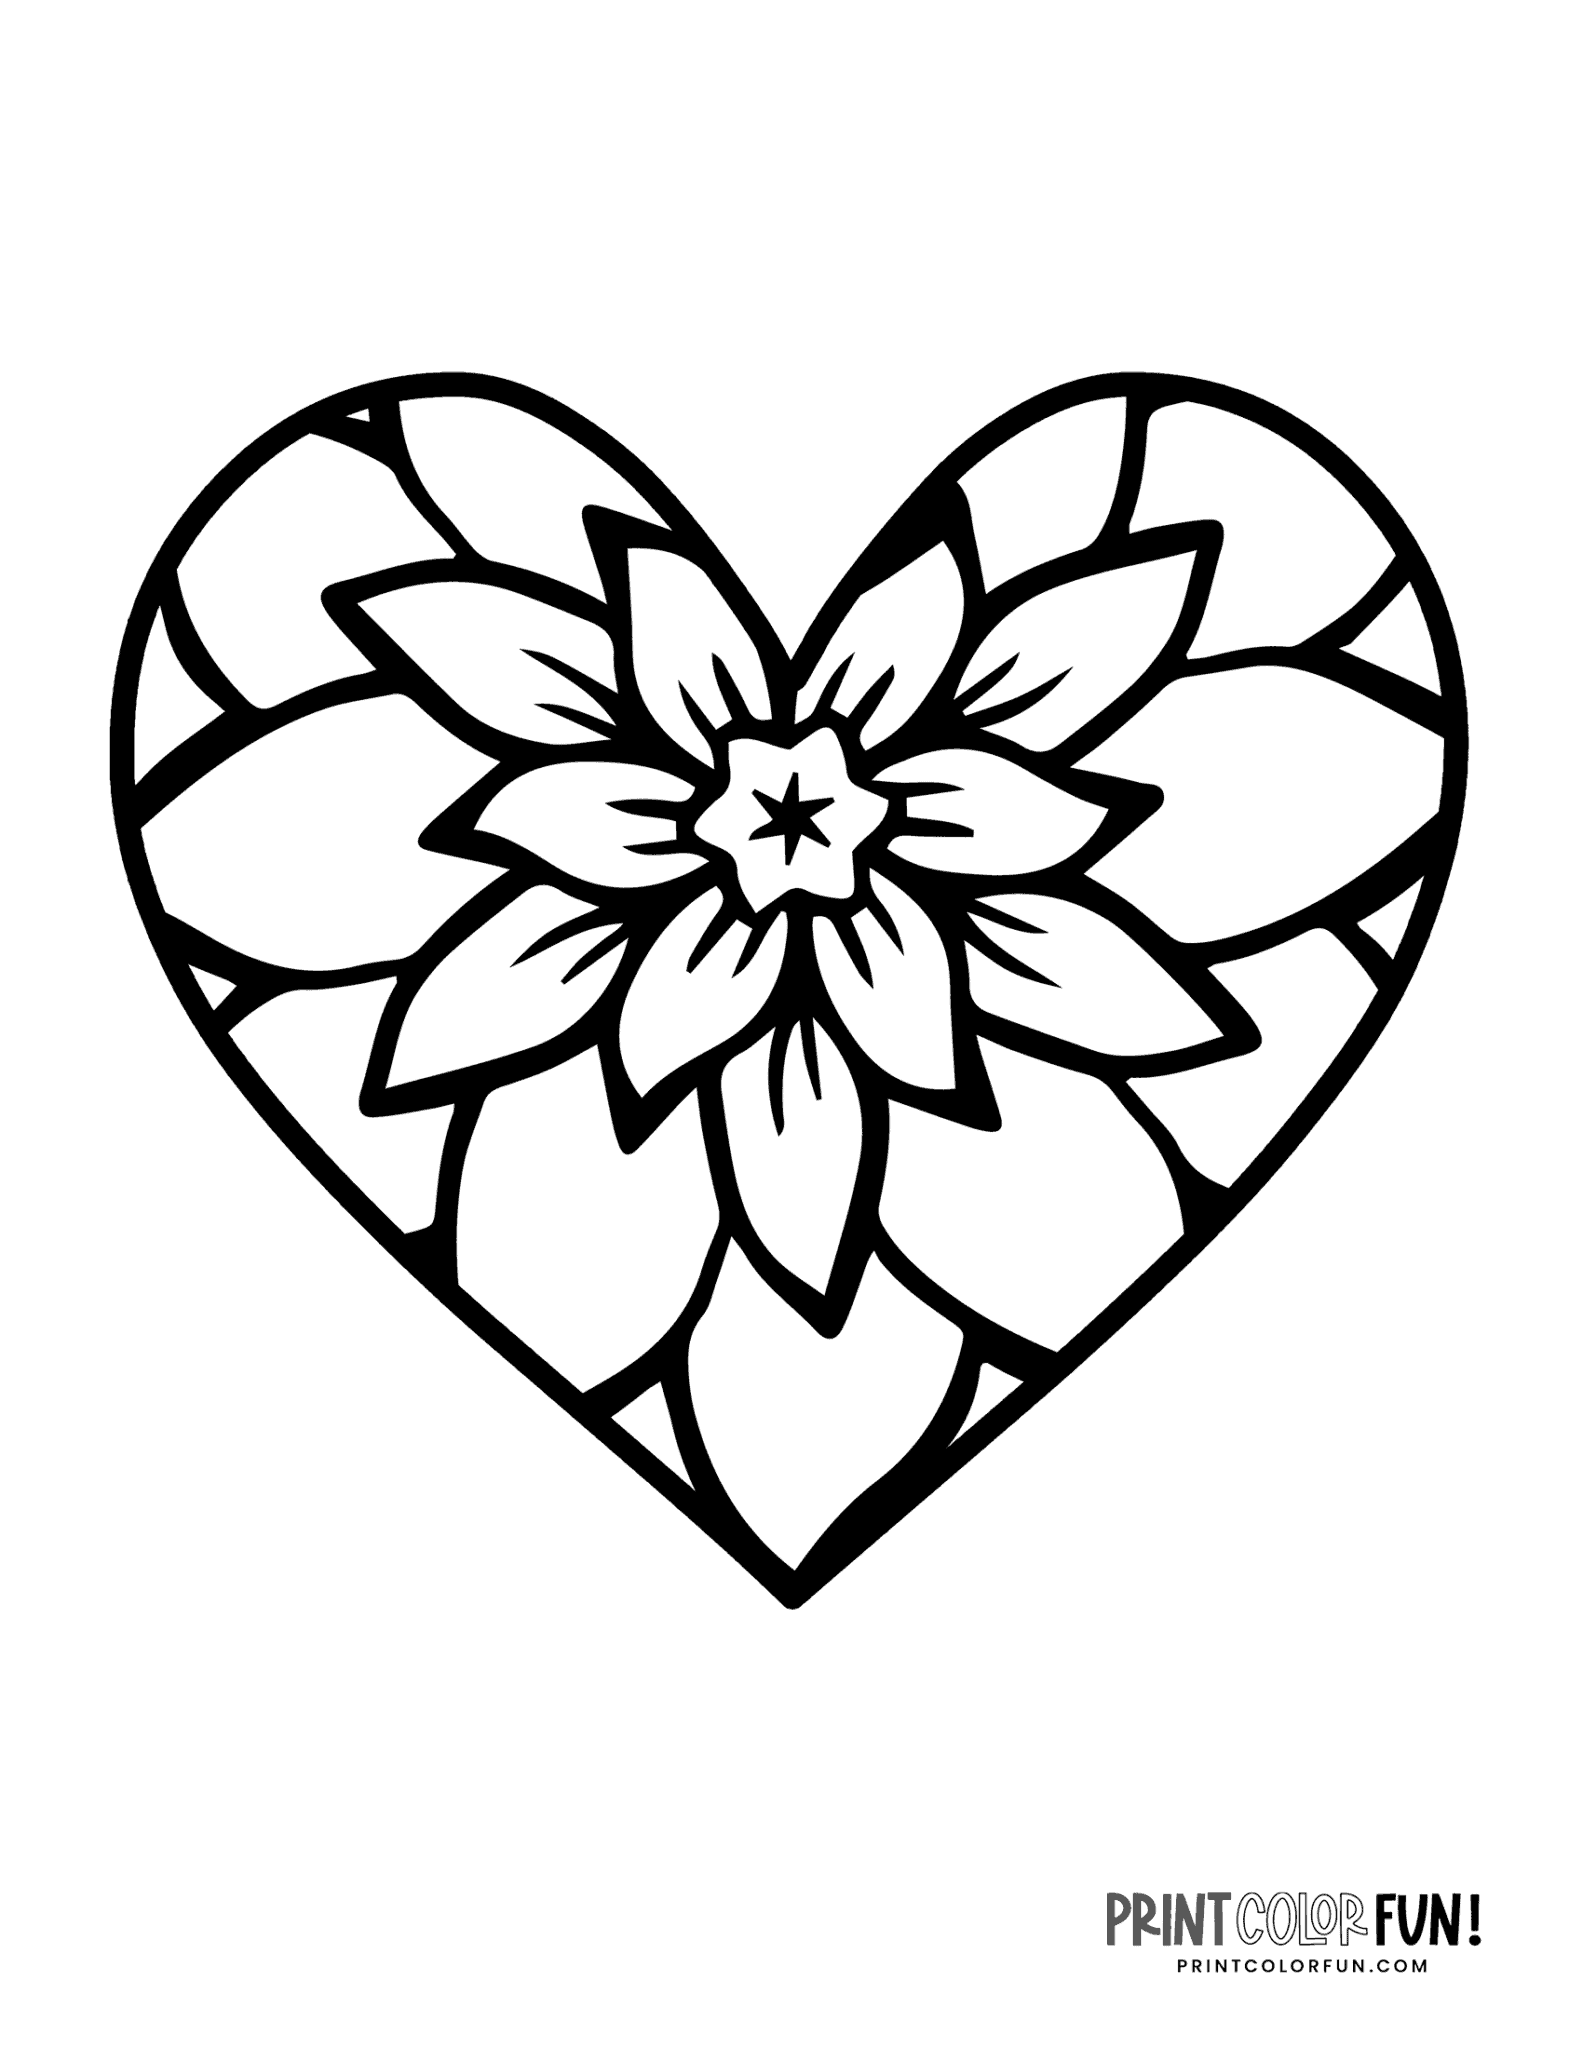 Printable Coloring Page Hearts And Flowers Heart Coloring Page Love ...